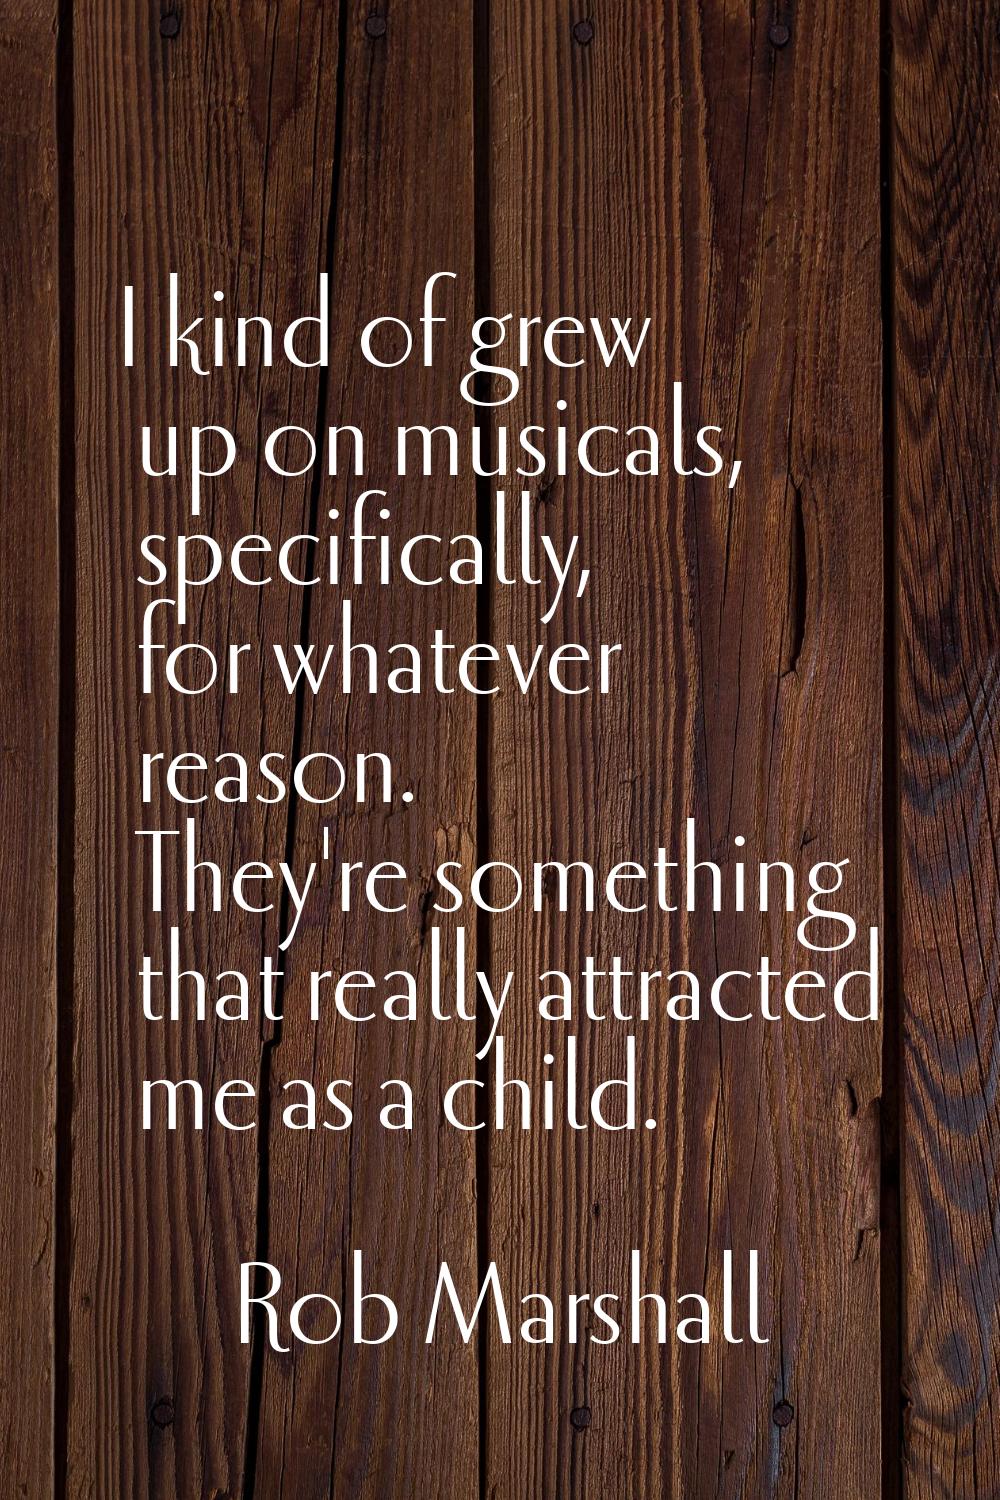 I kind of grew up on musicals, specifically, for whatever reason. They're something that really att